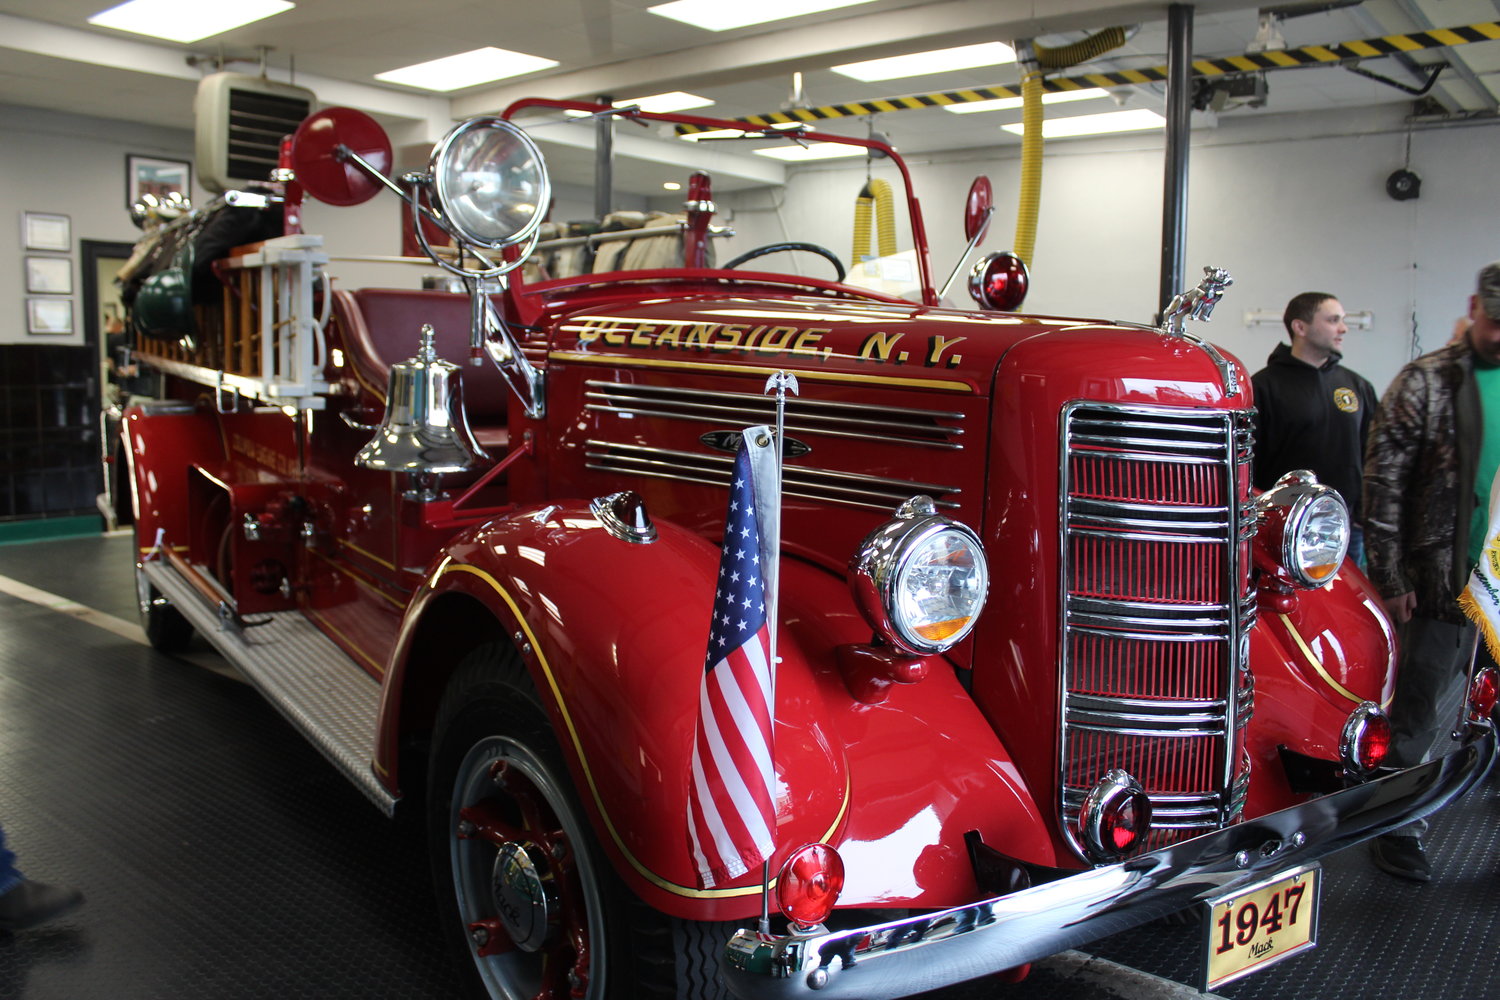 A model of power and resilience, the 1947 Mack truck has served its purpose dutifully for nearly a half-century fighting fires, and can finally rest at the Columbia Engine Company No. 1 station.